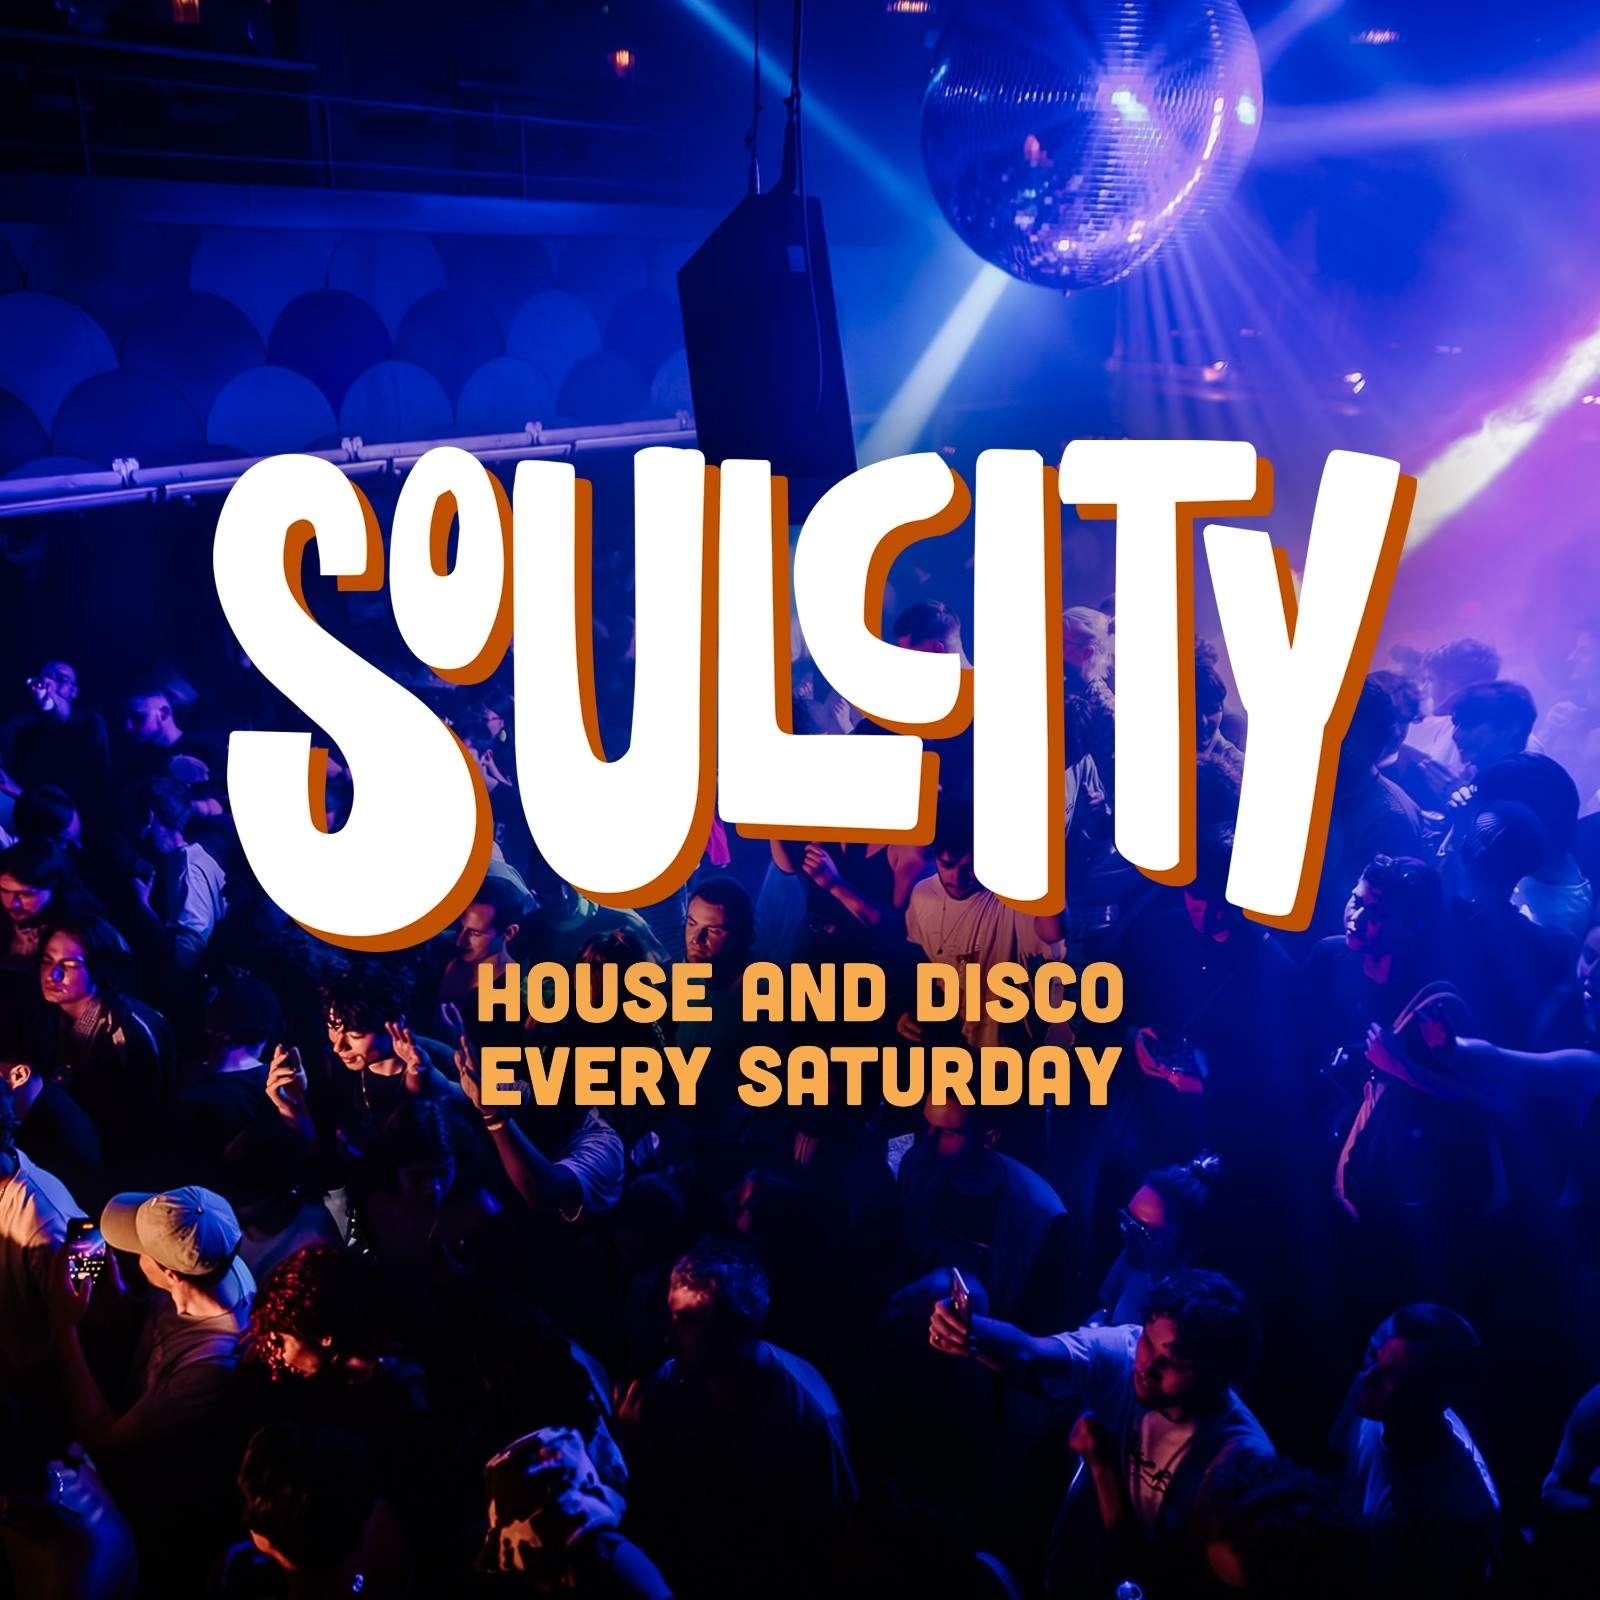 Soul City: House & Disco Every Saturday - フライヤー表